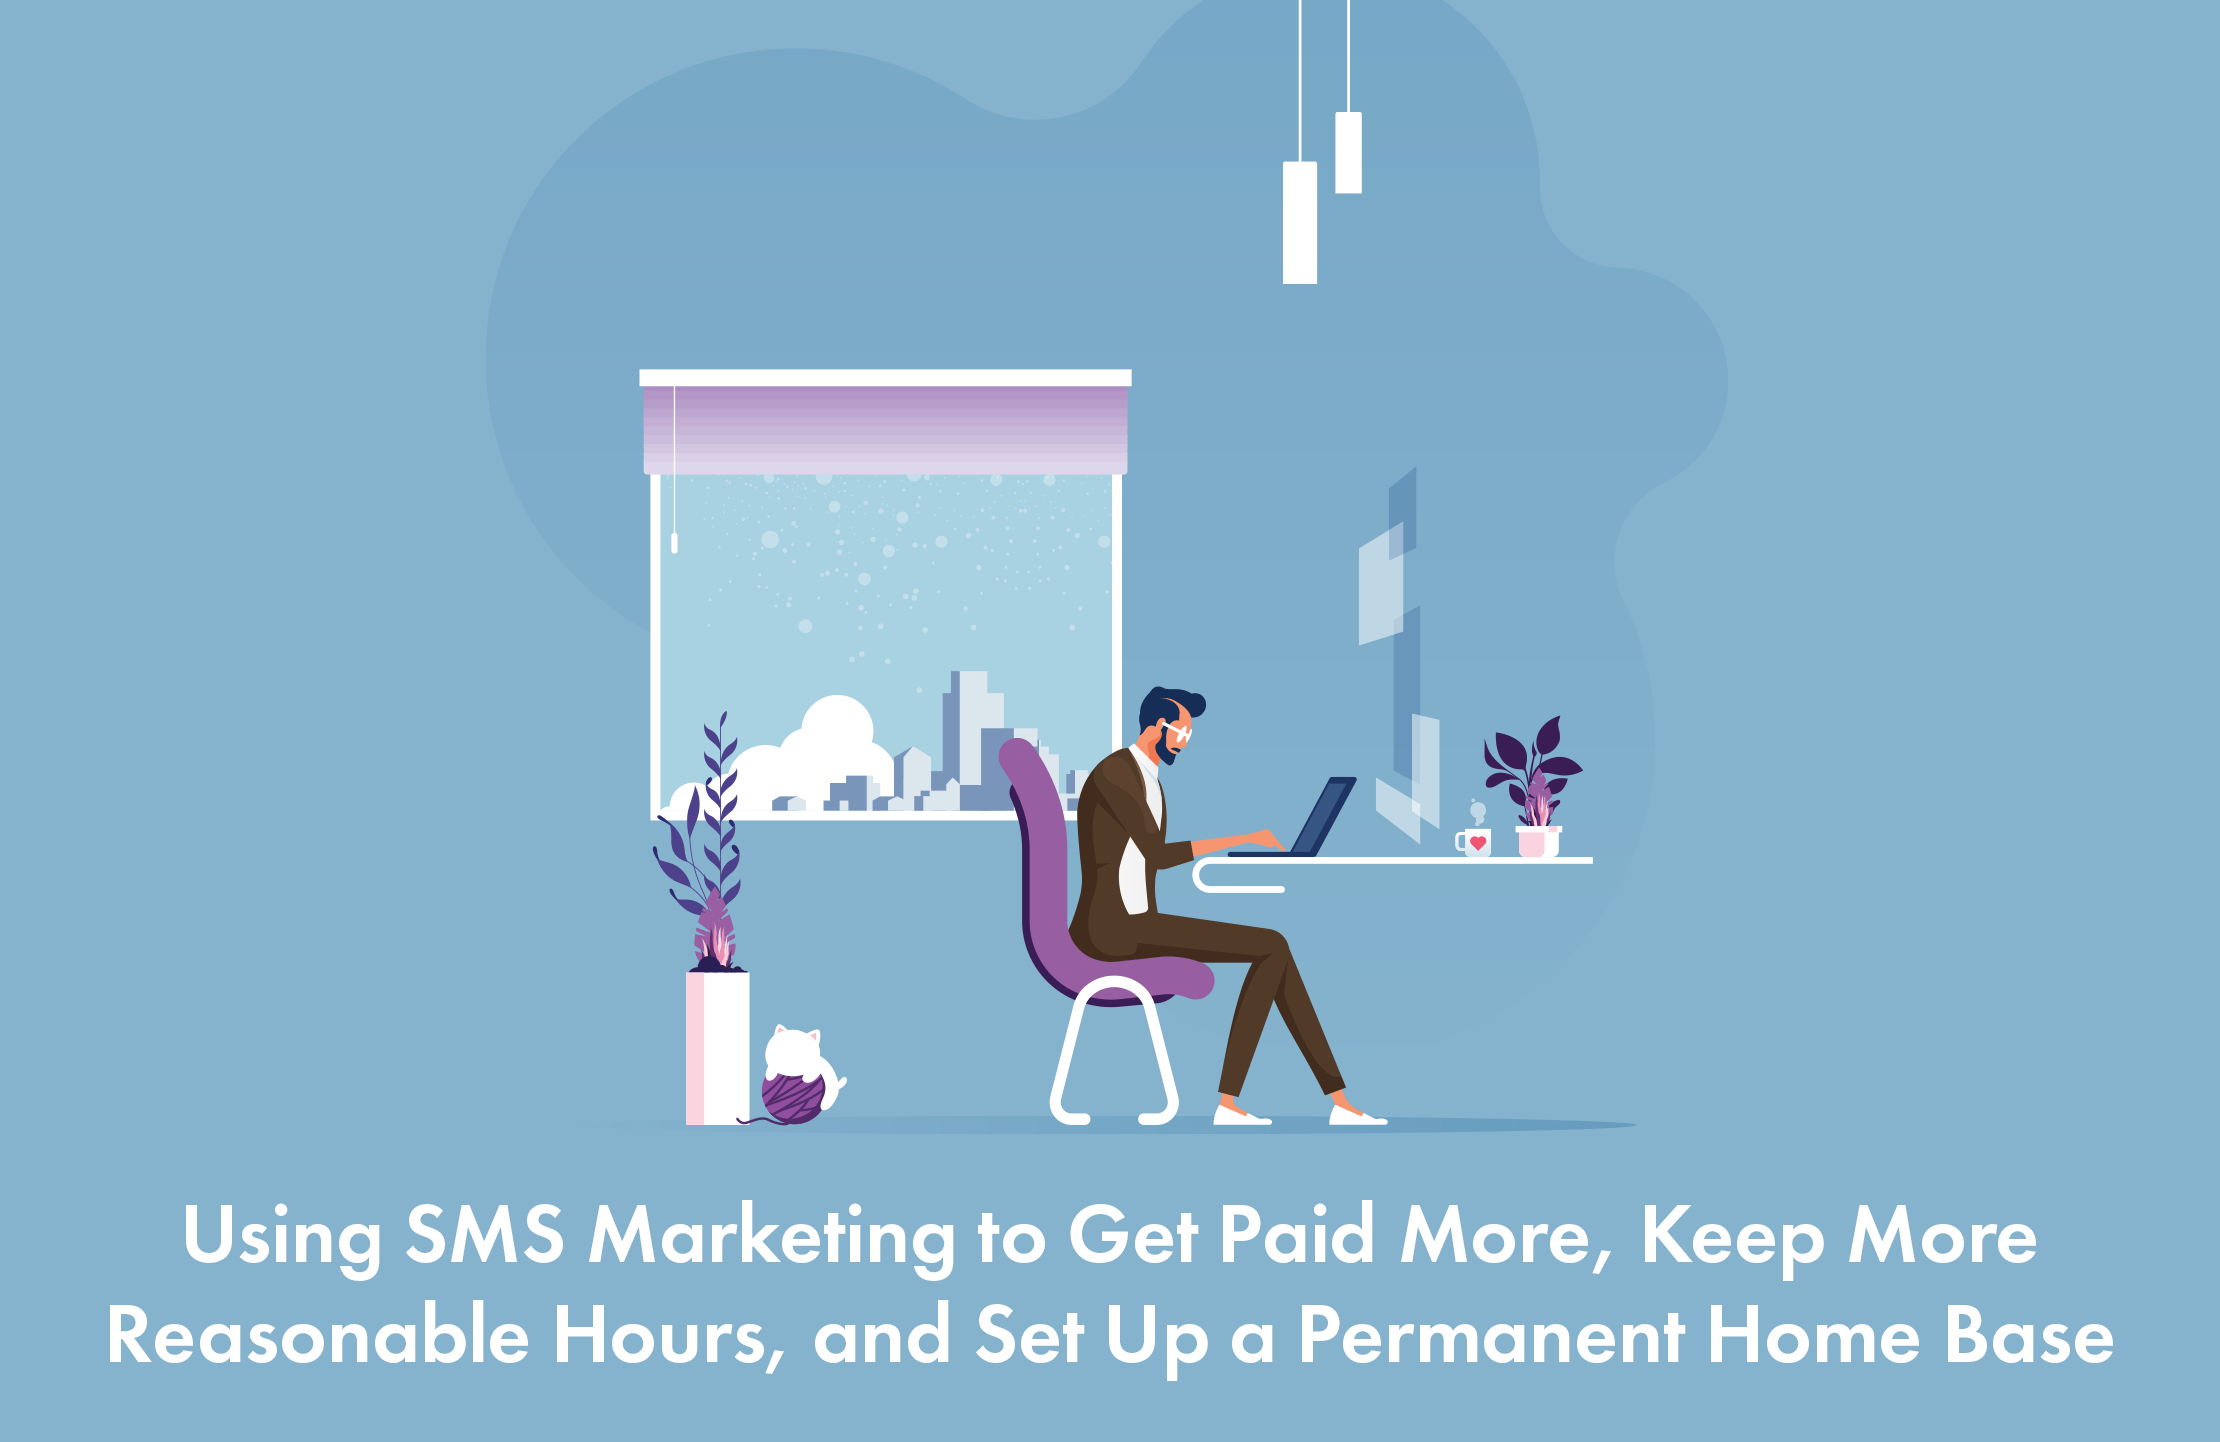 Using SMS Marketing to Get Paid More, Keep More Reasonable Hours, and Set Up a Permanent Home Base